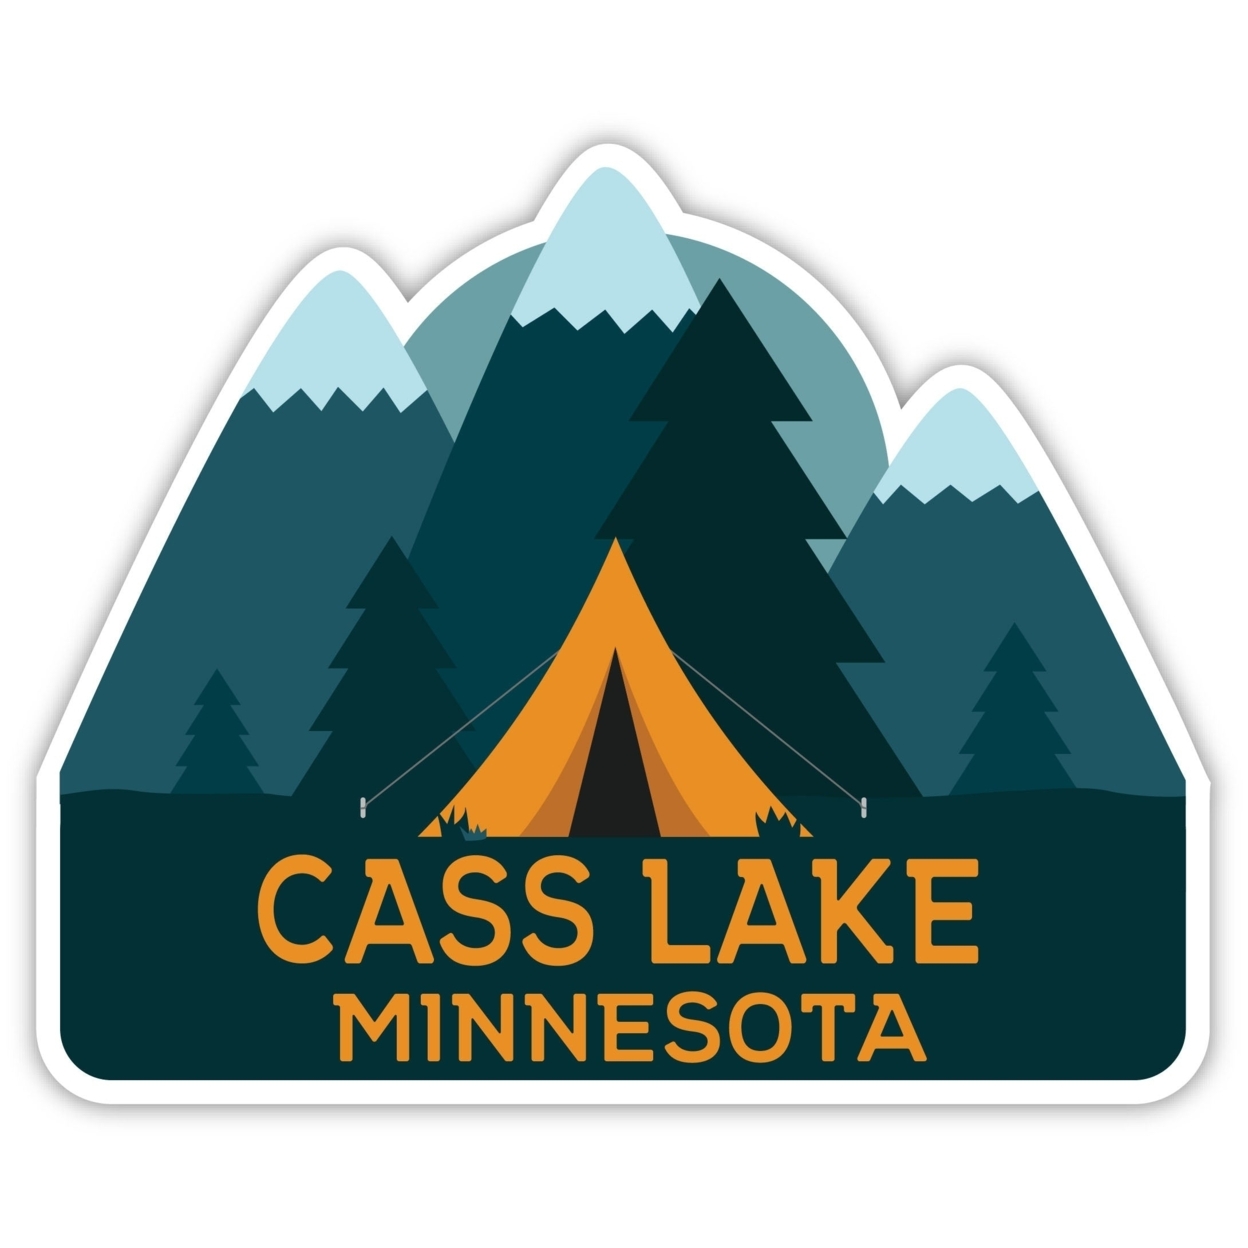 Cass Lake Minnesota Souvenir Decorative Stickers (Choose Theme And Size) - 4-Pack, 4-Inch, Great Outdoors